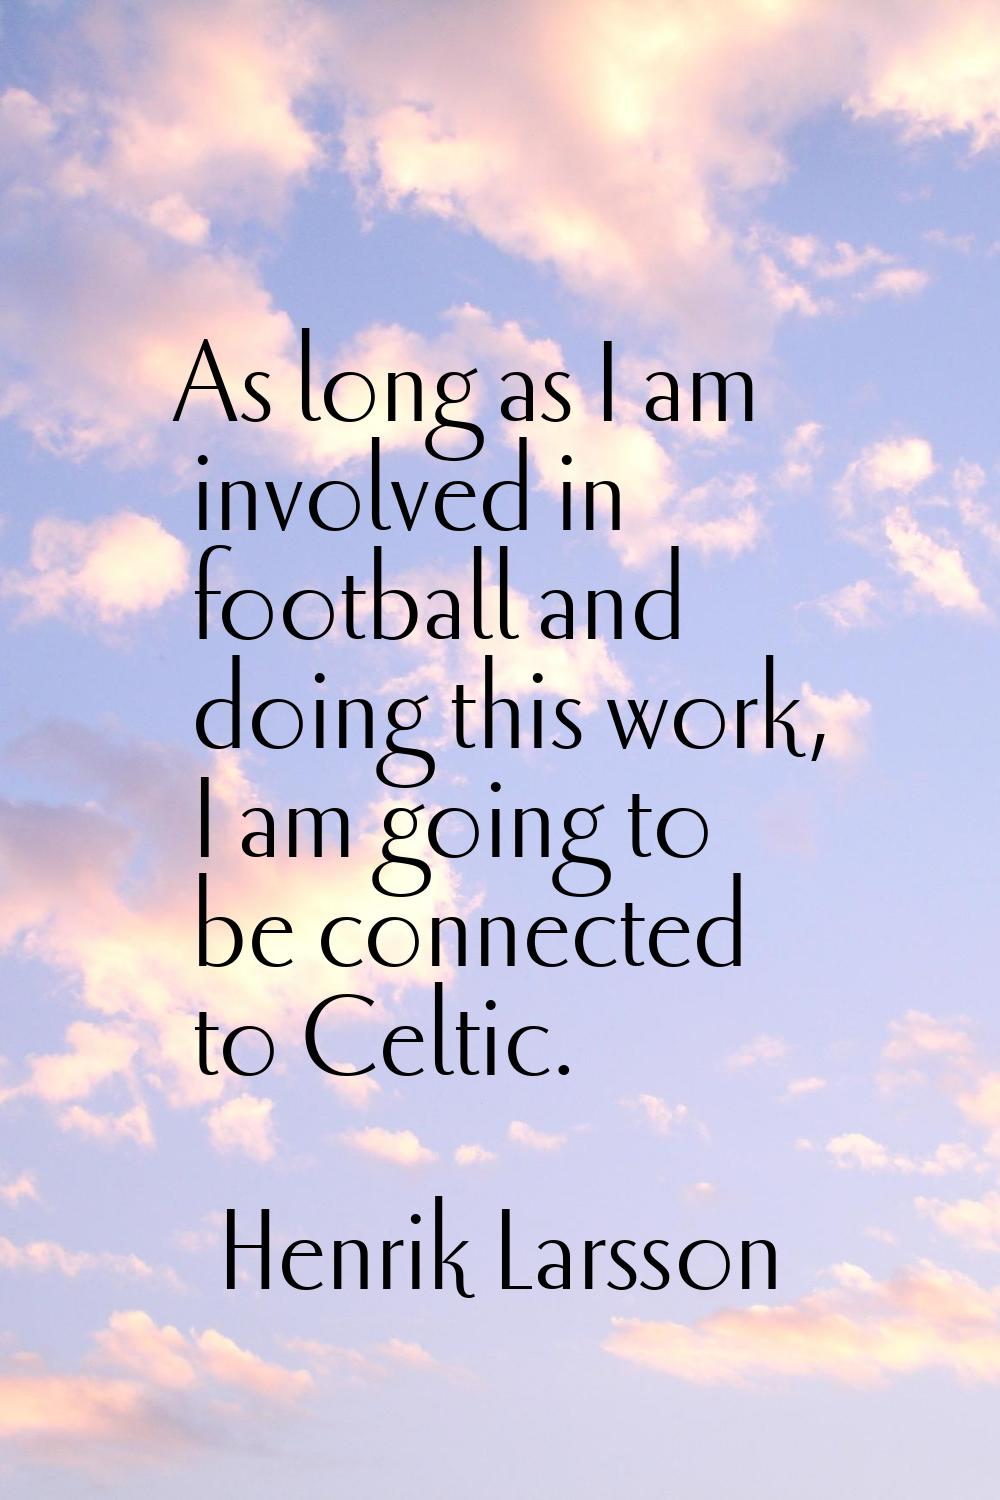 As long as I am involved in football and doing this work, I am going to be connected to Celtic.